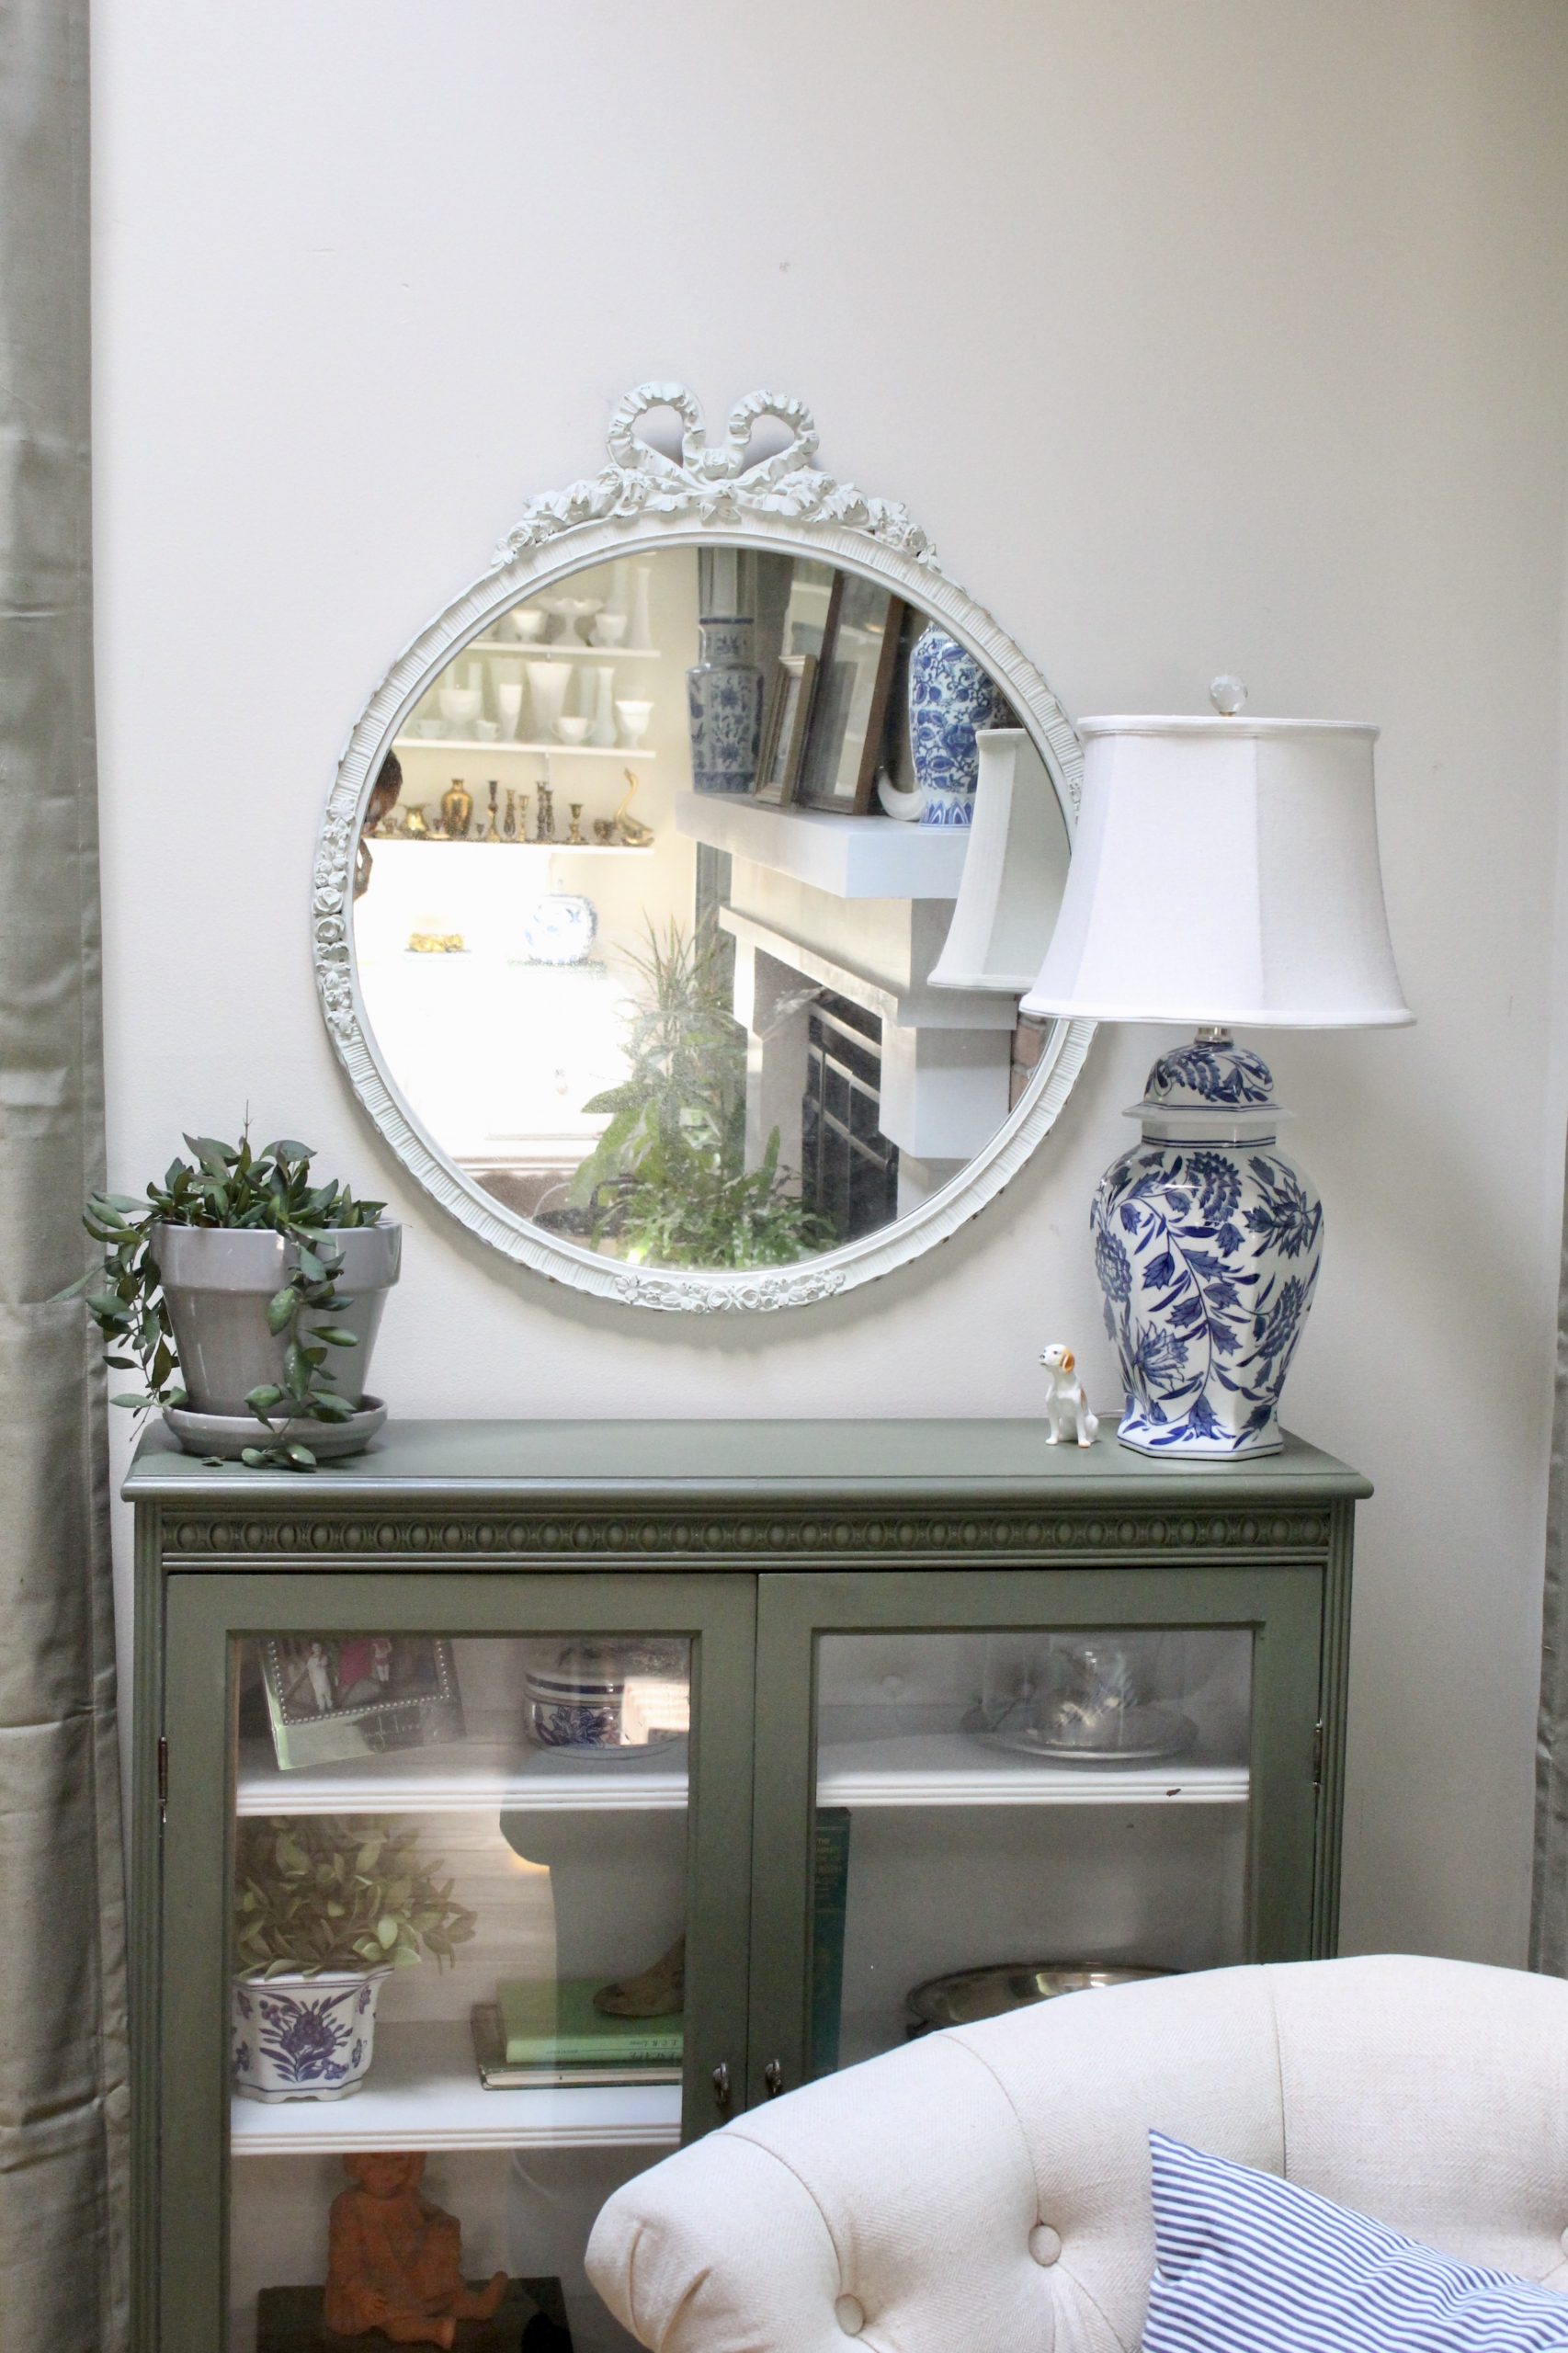 Antique Cabinet Gets a Makeover with Green Fusion Paint